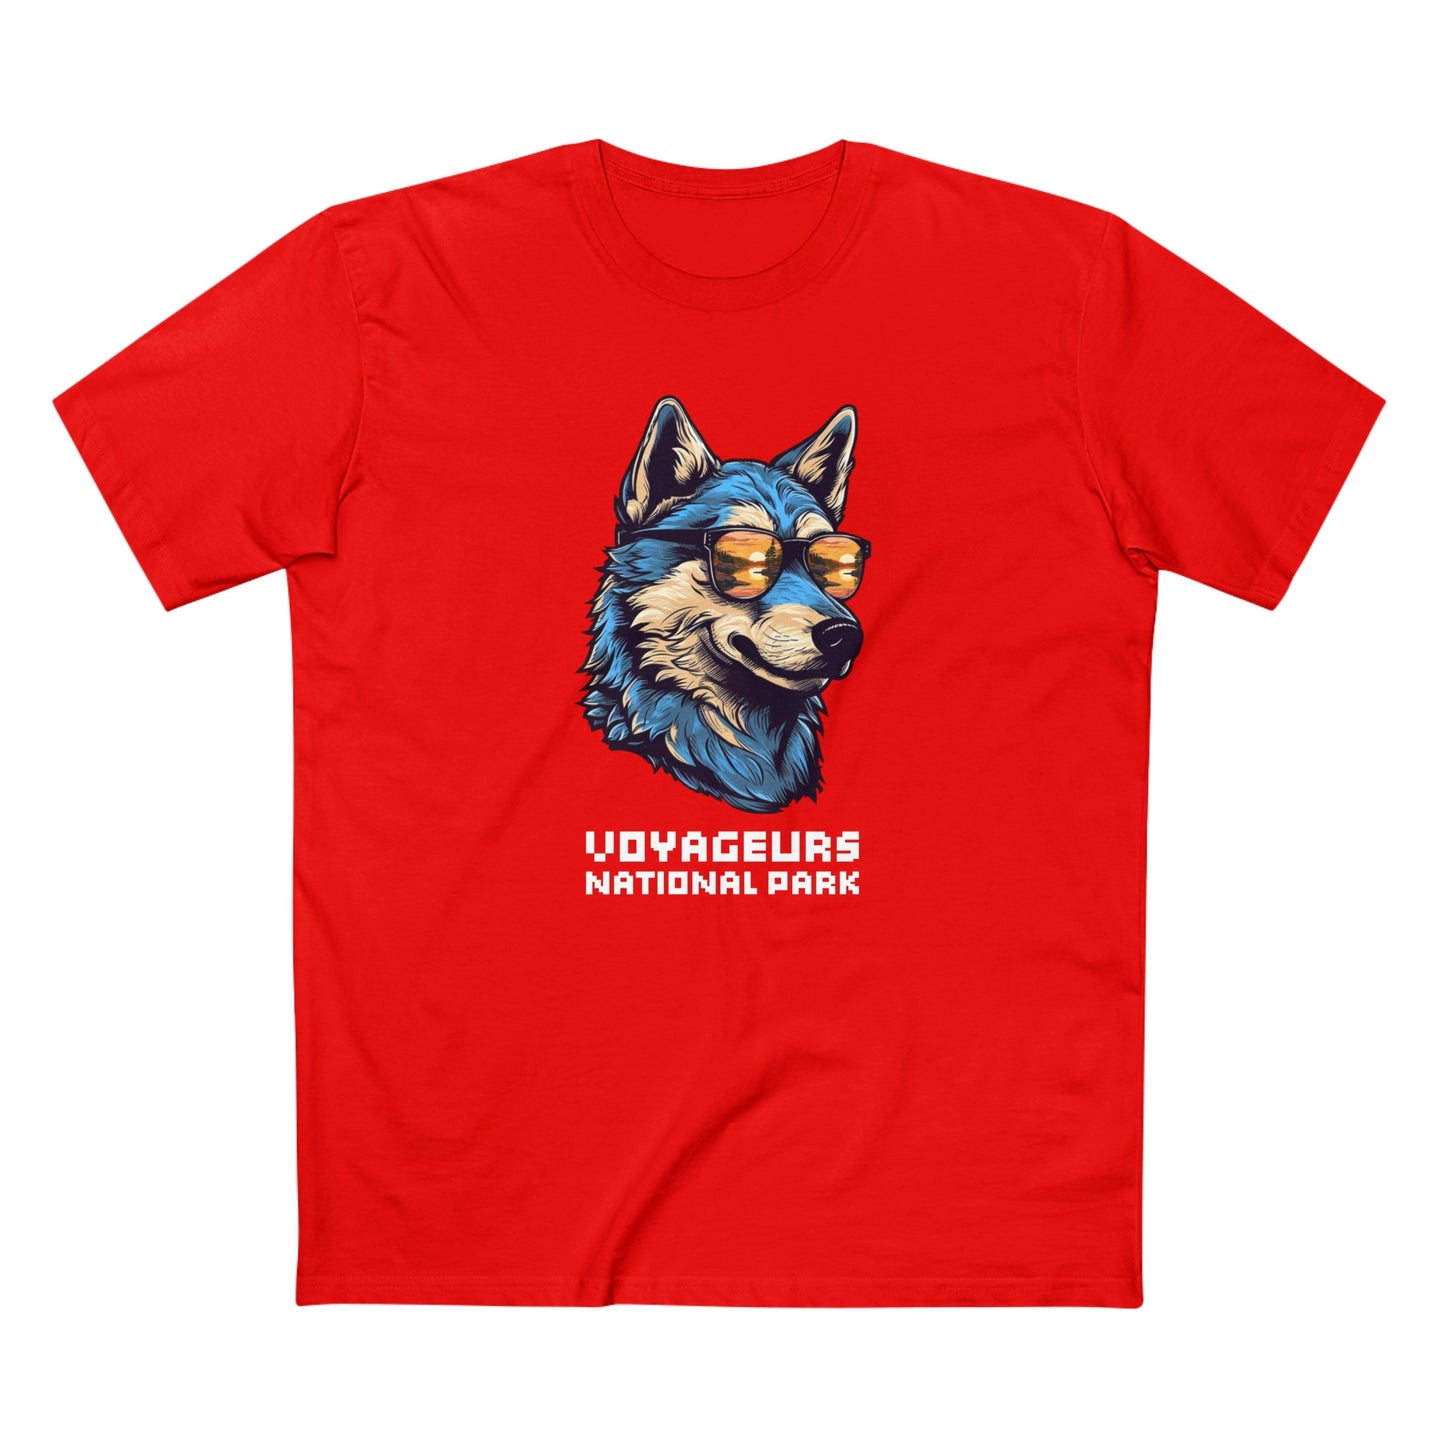 Voyageurs National Park T-Shirt - Smooth Wolf